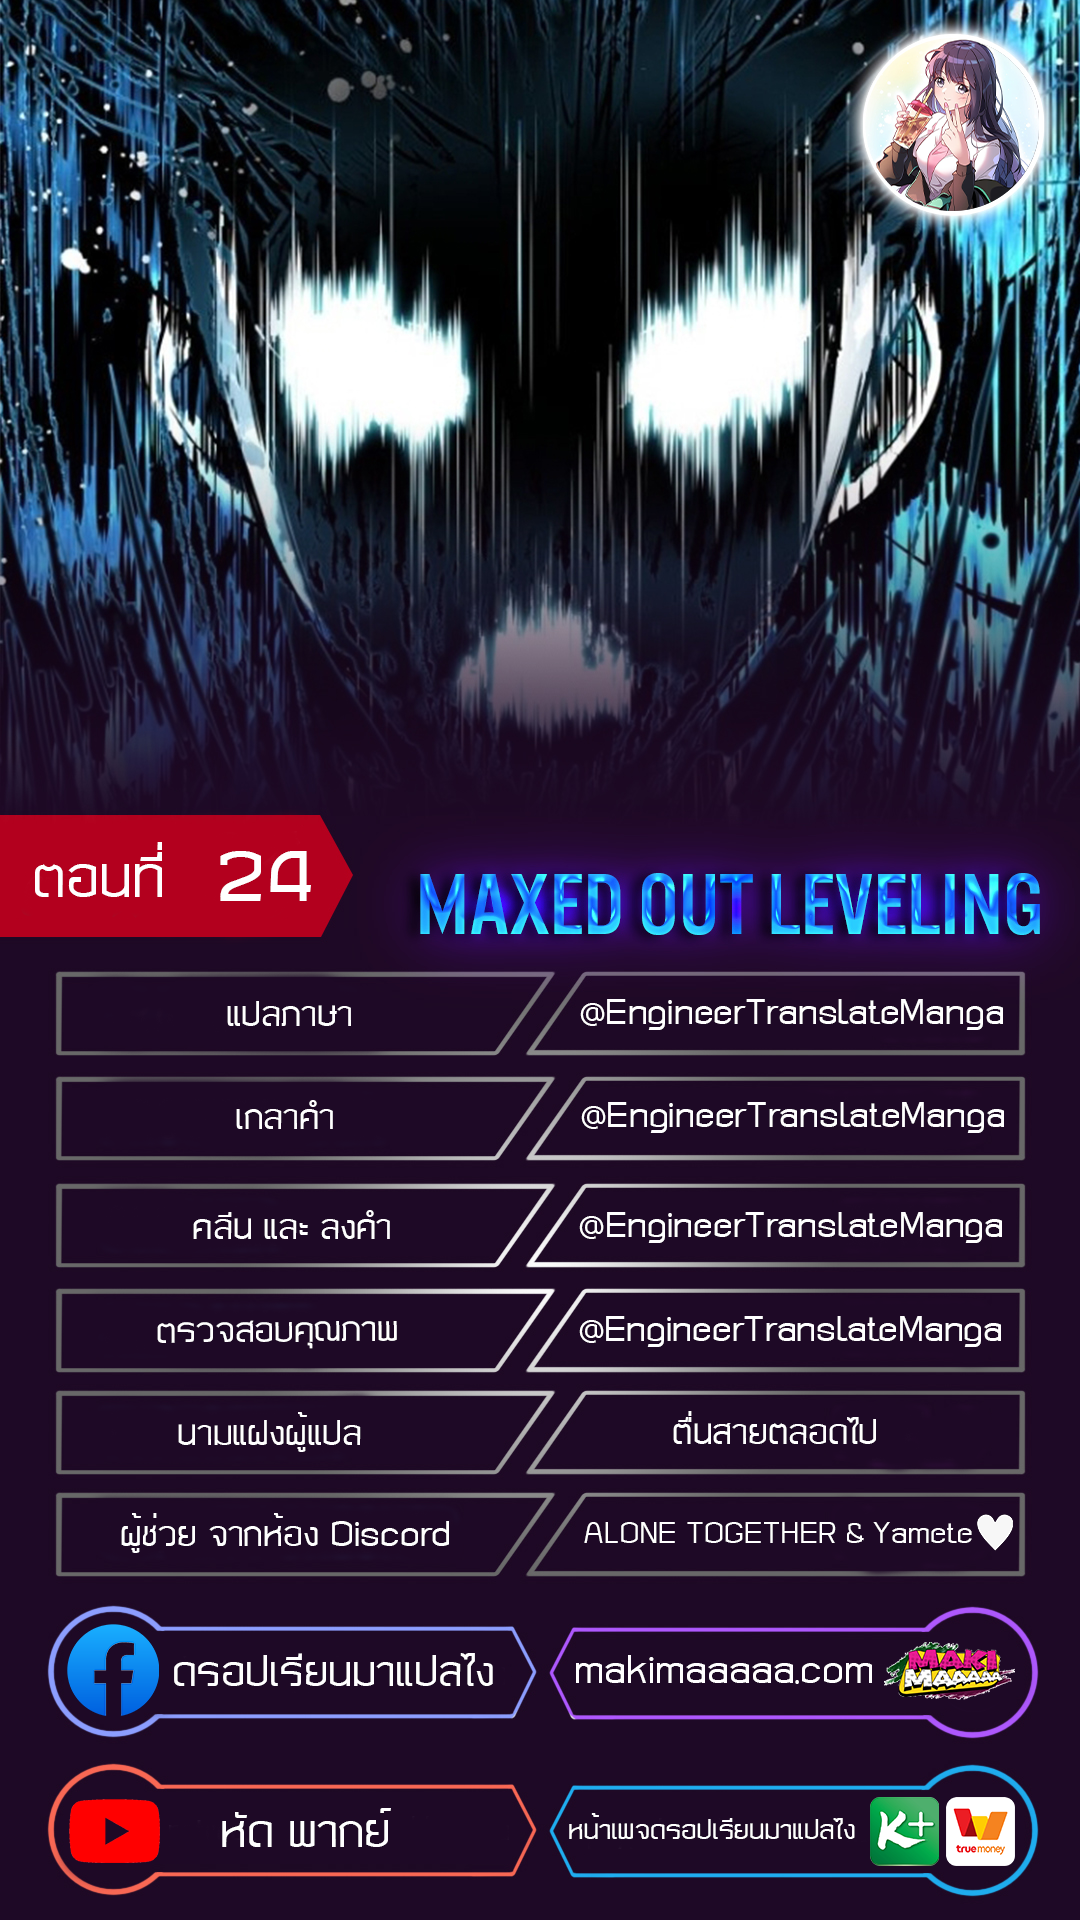 Maxed Out Leveling 24 01